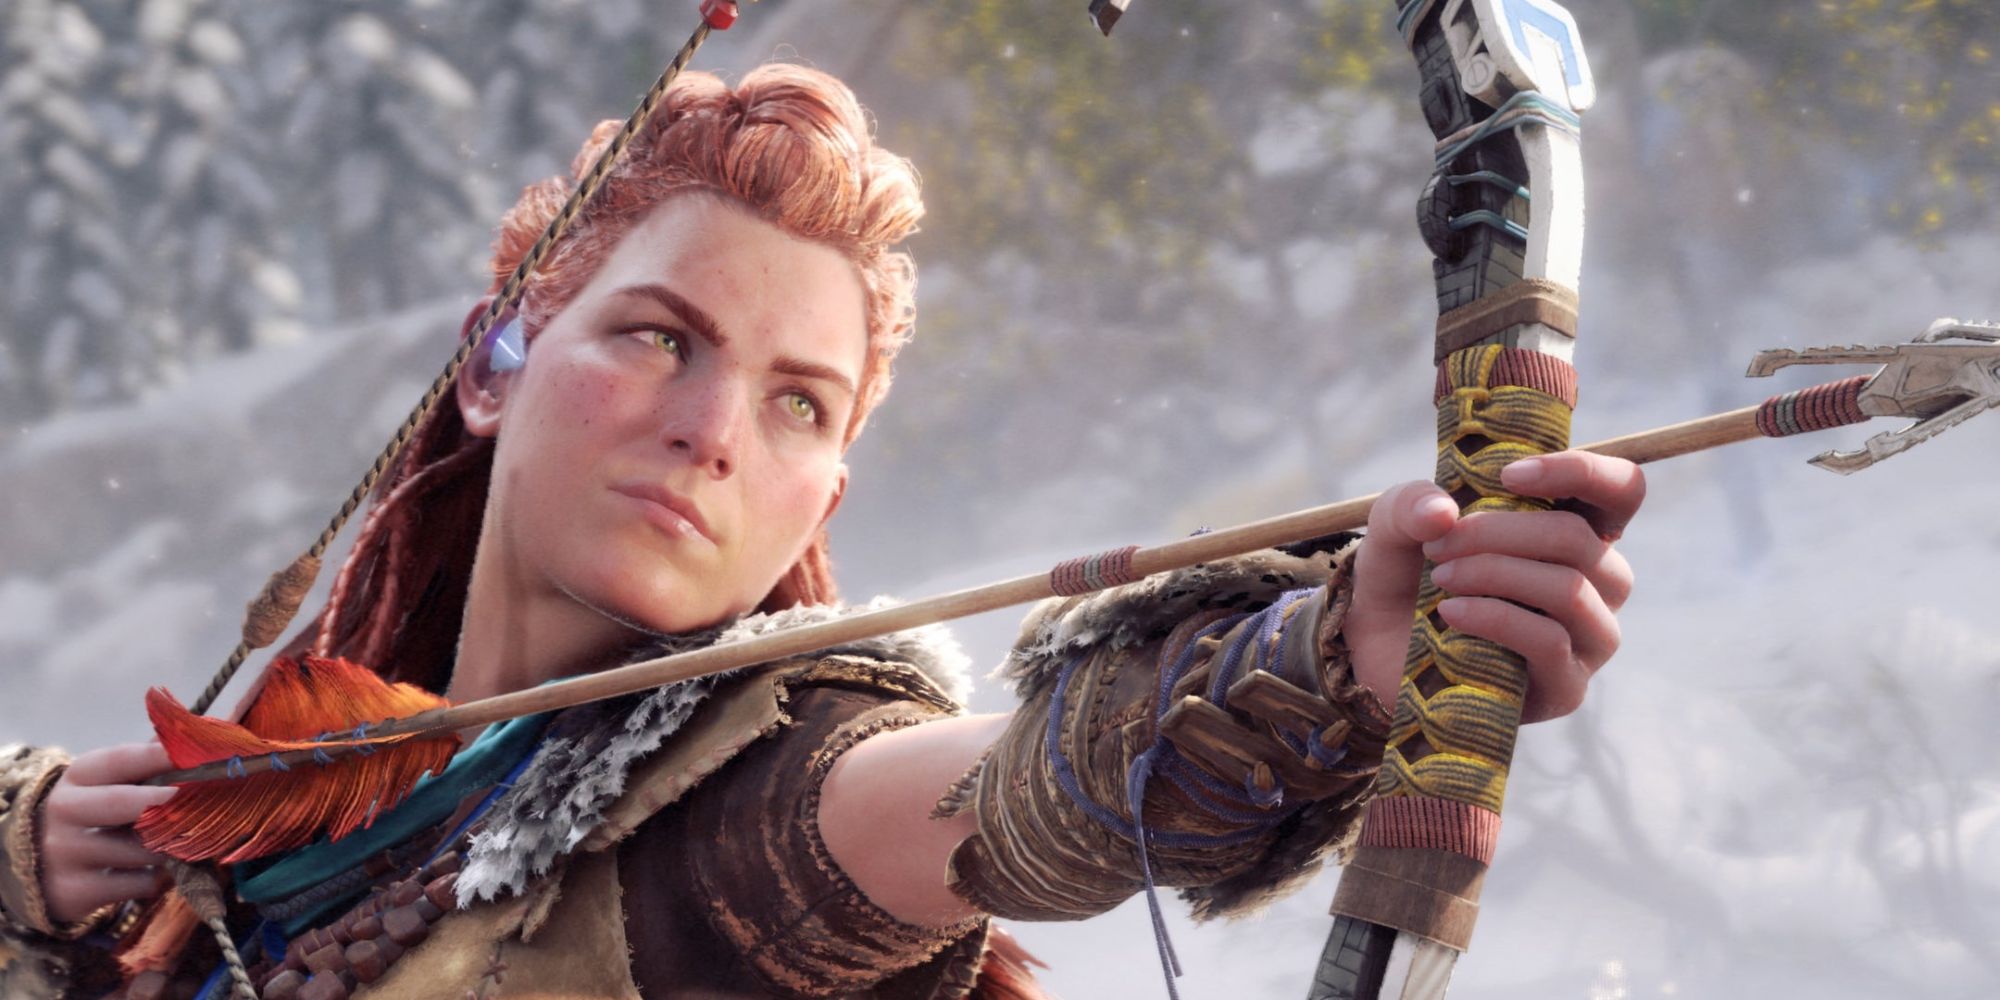 Aloy is reprising her role as Horizon Forbidden West's protagonist